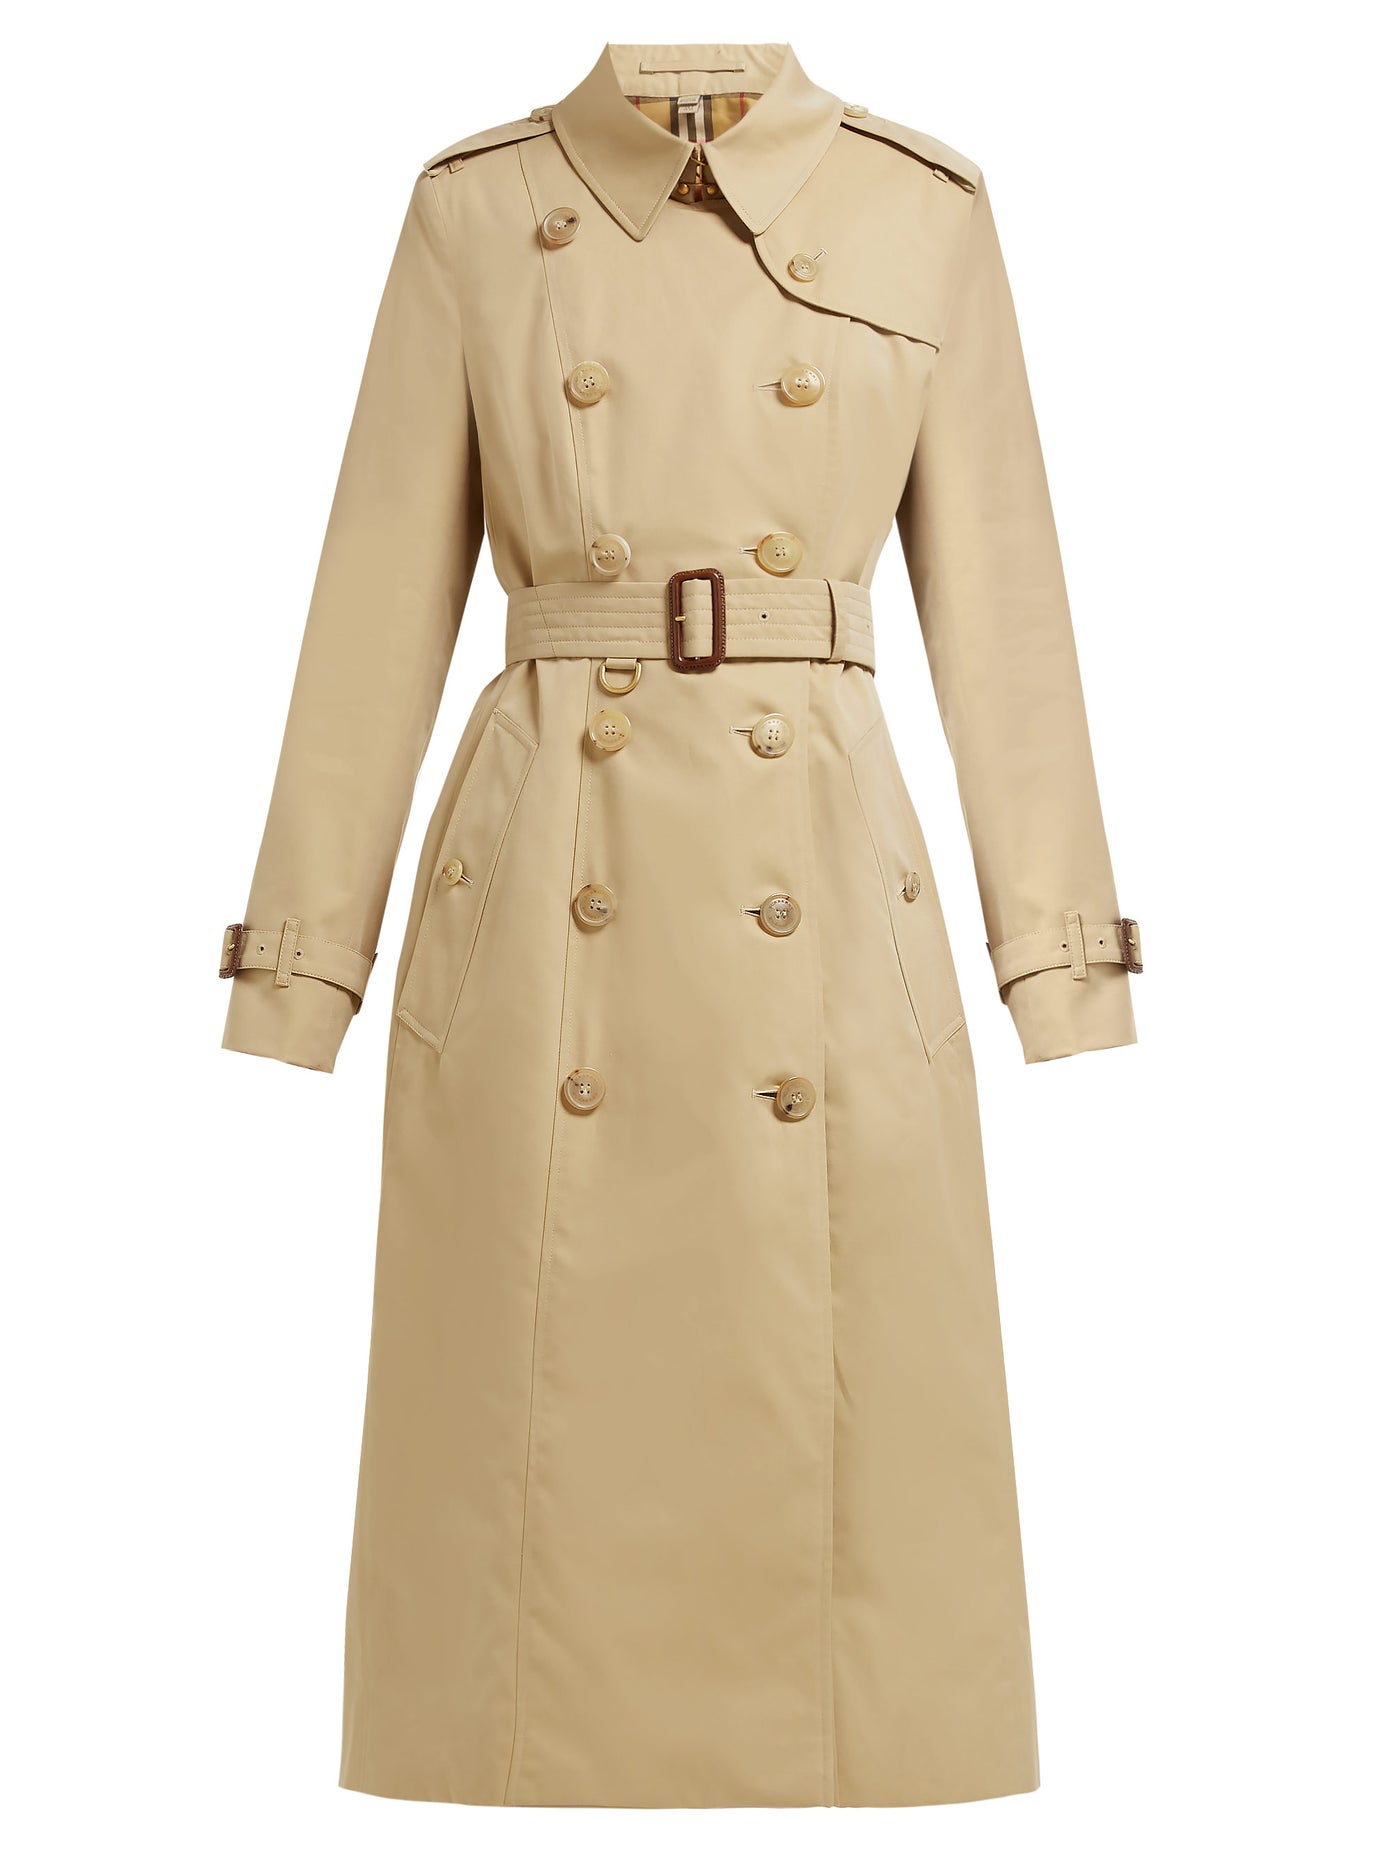 Burberry - Chelsea Double-Breasted Cotton Trench Coat | FASHION STYLE FAN